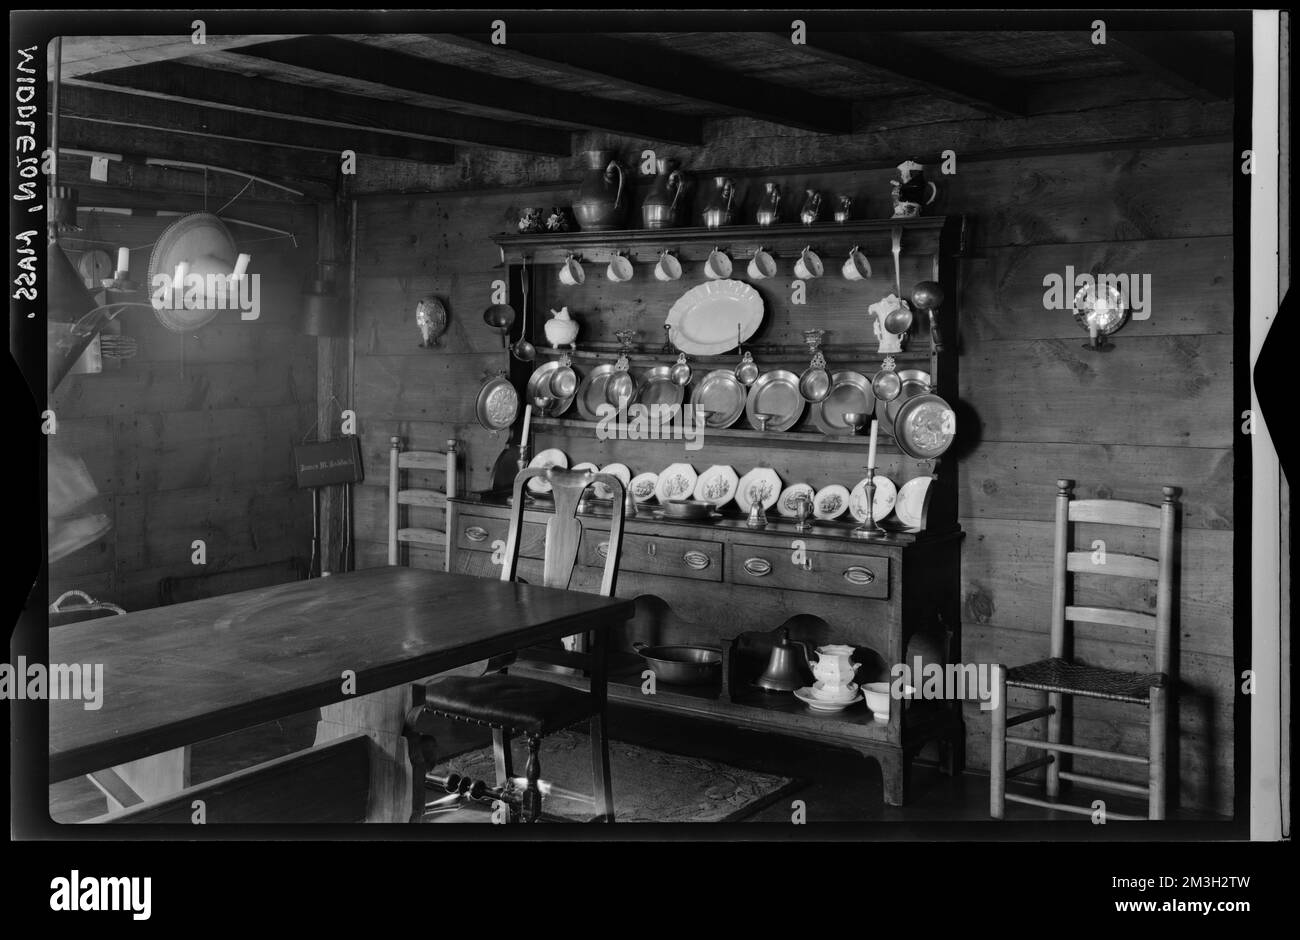 Middleton, hutch displaying tableware, unidentified house , Architectural elements, Rooms & spaces, Tableware. Samuel Chamberlain Photograph Negatives Collection Stock Photo